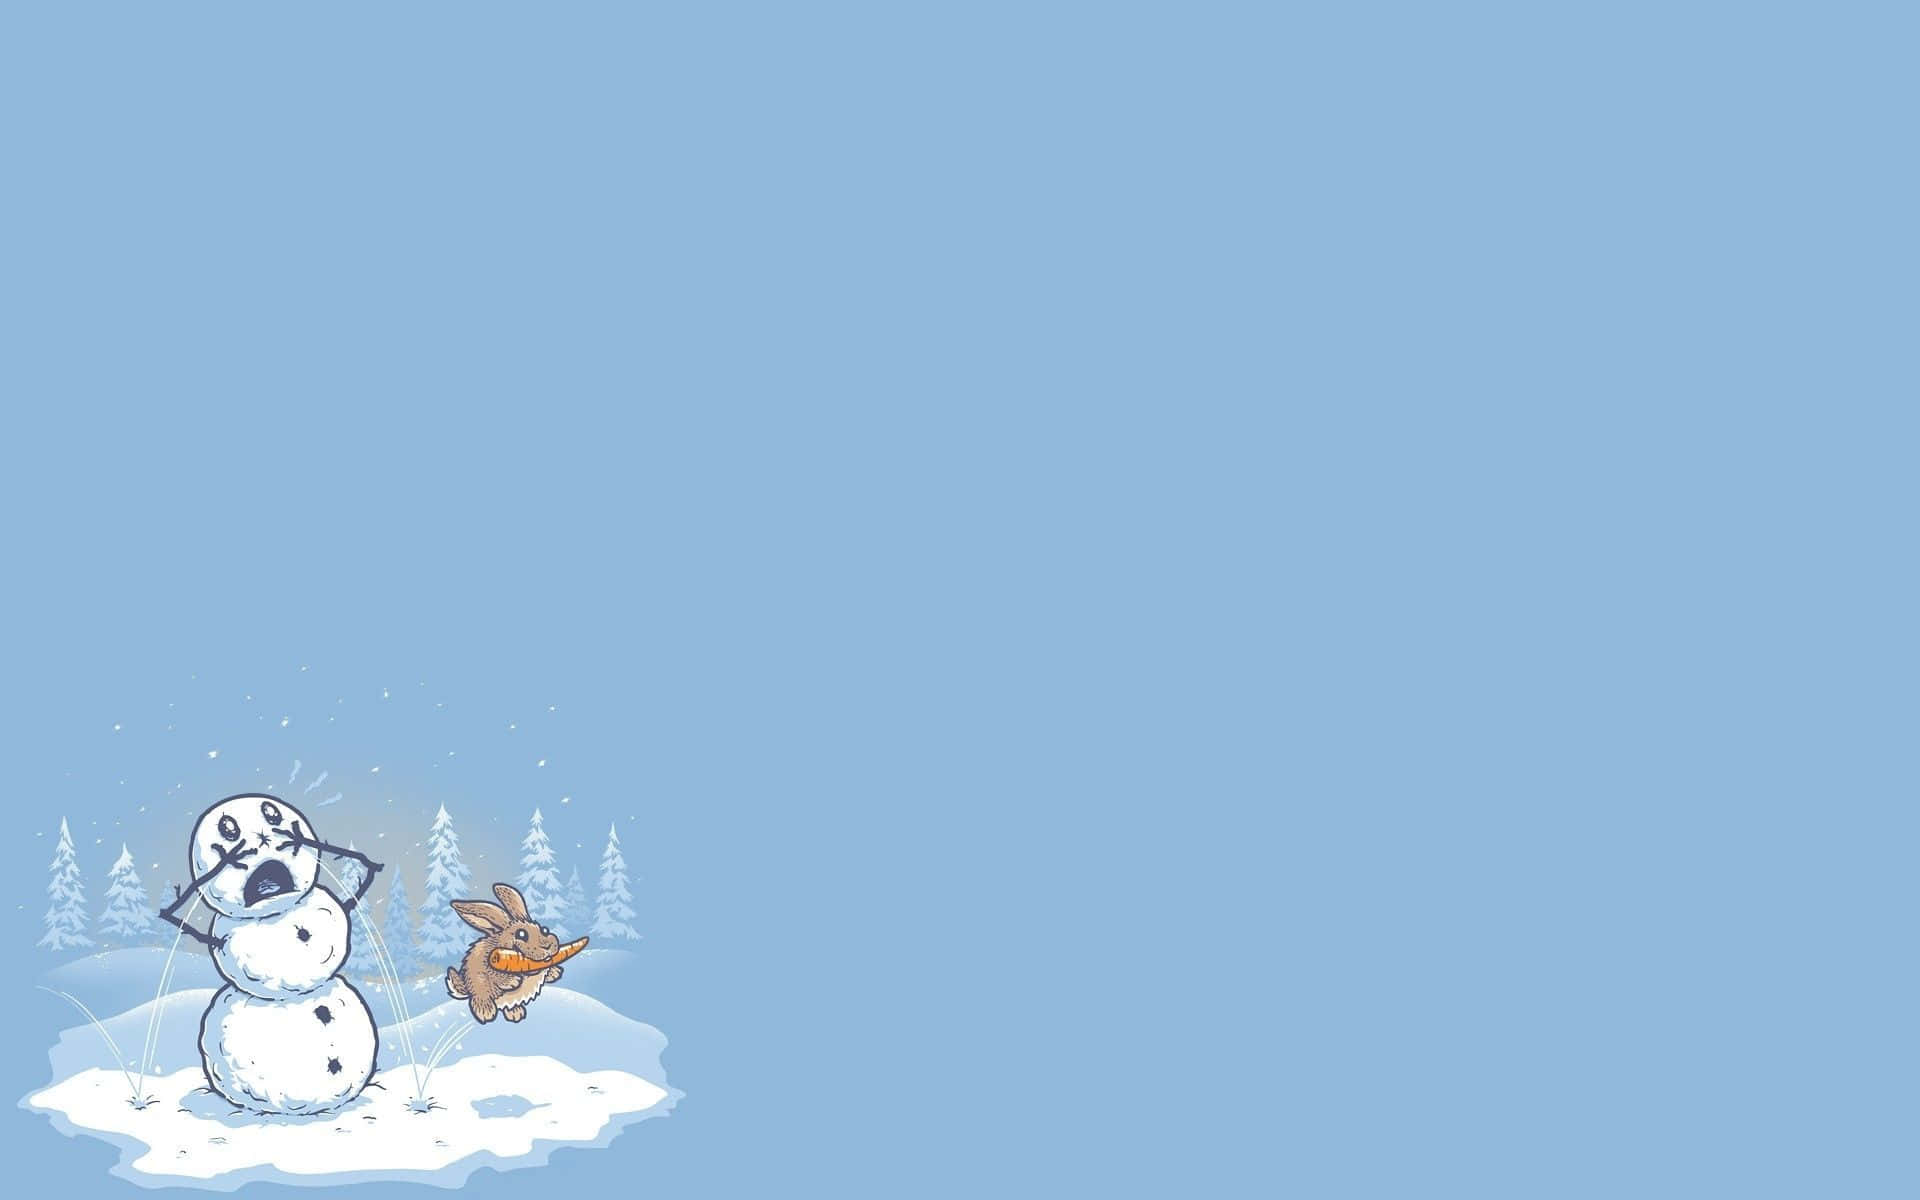 ”Stay Warm During the Minimalistic Winter” Wallpaper